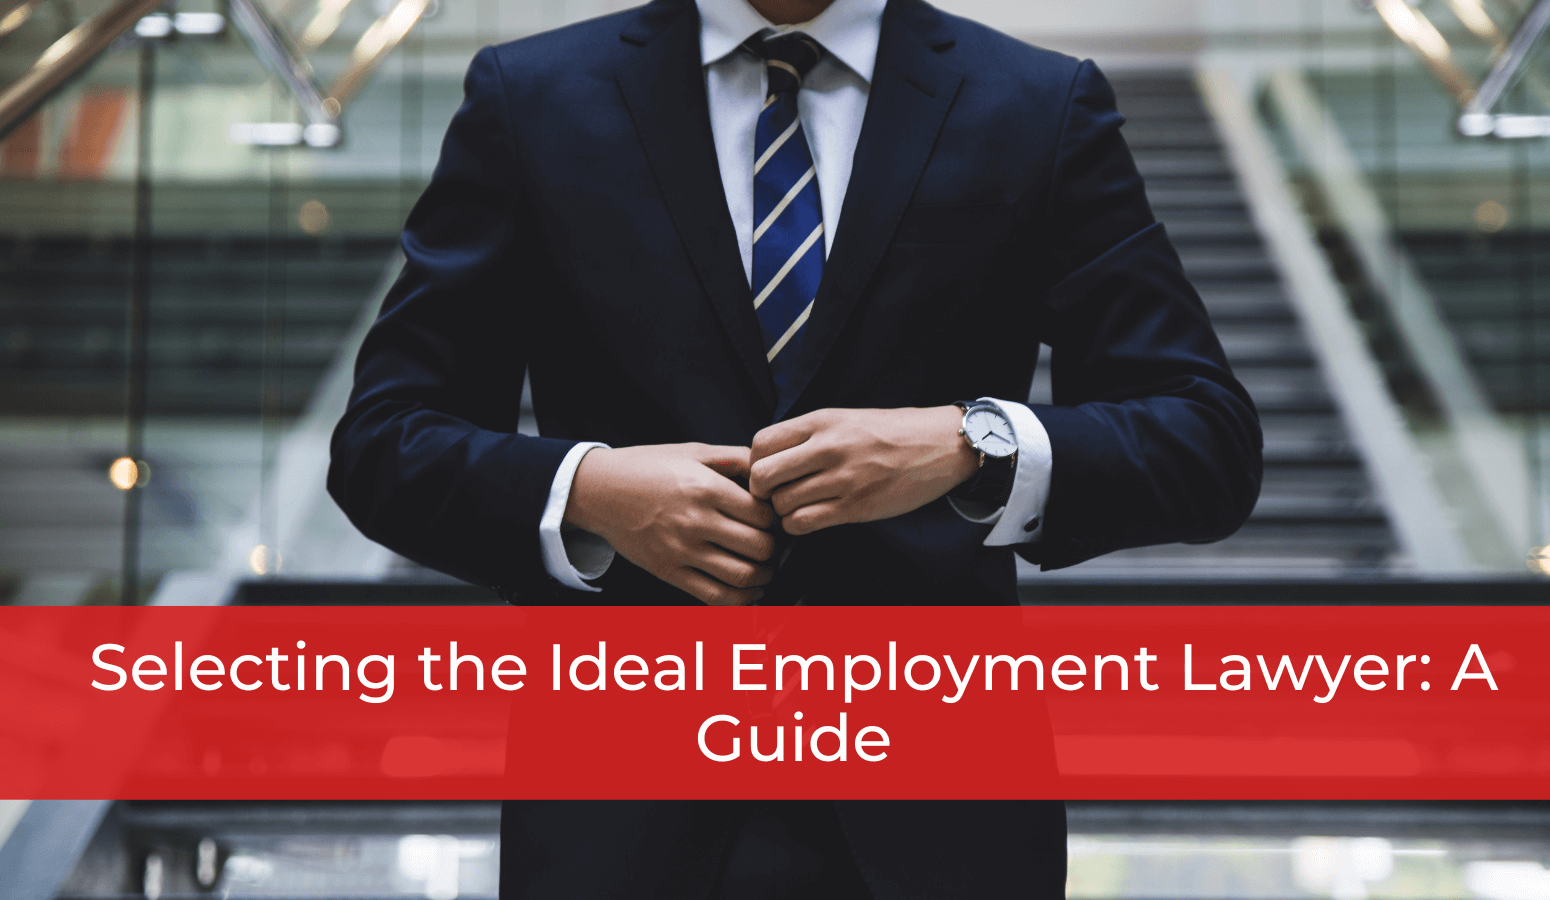 Featured image for “Selecting the Ideal Employment Lawyer: A Guide”